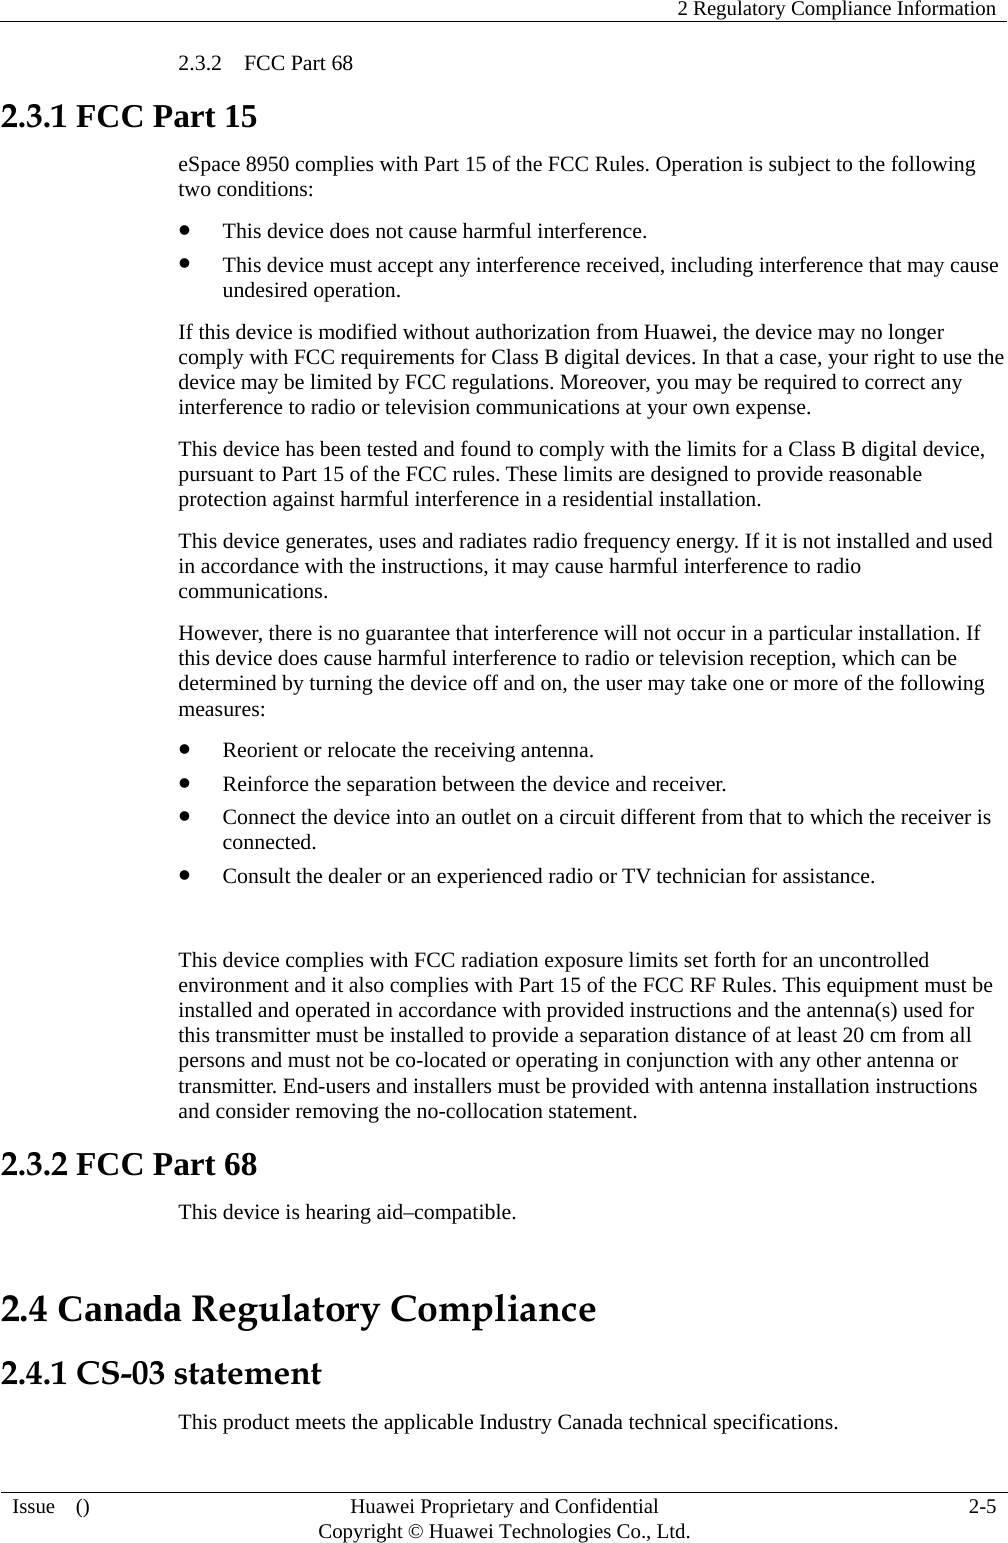    2 Regulatory Compliance Information  Issue  ()  Huawei Proprietary and Confidential     Copyright © Huawei Technologies Co., Ltd. 2-5 2.3.2  FCC Part 68 2.3.1 FCC Part 15 eSpace 8950 complies with Part 15 of the FCC Rules. Operation is subject to the following two conditions:  This device does not cause harmful interference.  This device must accept any interference received, including interference that may cause undesired operation. If this device is modified without authorization from Huawei, the device may no longer comply with FCC requirements for Class B digital devices. In that a case, your right to use the device may be limited by FCC regulations. Moreover, you may be required to correct any interference to radio or television communications at your own expense. This device has been tested and found to comply with the limits for a Class B digital device, pursuant to Part 15 of the FCC rules. These limits are designed to provide reasonable protection against harmful interference in a residential installation. This device generates, uses and radiates radio frequency energy. If it is not installed and used in accordance with the instructions, it may cause harmful interference to radio communications. However, there is no guarantee that interference will not occur in a particular installation. If this device does cause harmful interference to radio or television reception, which can be determined by turning the device off and on, the user may take one or more of the following measures:  Reorient or relocate the receiving antenna.  Reinforce the separation between the device and receiver.  Connect the device into an outlet on a circuit different from that to which the receiver is connected.  Consult the dealer or an experienced radio or TV technician for assistance.  This device complies with FCC radiation exposure limits set forth for an uncontrolled environment and it also complies with Part 15 of the FCC RF Rules. This equipment must be installed and operated in accordance with provided instructions and the antenna(s) used for this transmitter must be installed to provide a separation distance of at least 20 cm from all persons and must not be co-located or operating in conjunction with any other antenna or transmitter. End-users and installers must be provided with antenna installation instructions and consider removing the no-collocation statement. 2.3.2 FCC Part 68 This device is hearing aid–compatible. 2.4 Canada Regulatory Compliance 2.4.1 CS-03 statement This product meets the applicable Industry Canada technical specifications.   